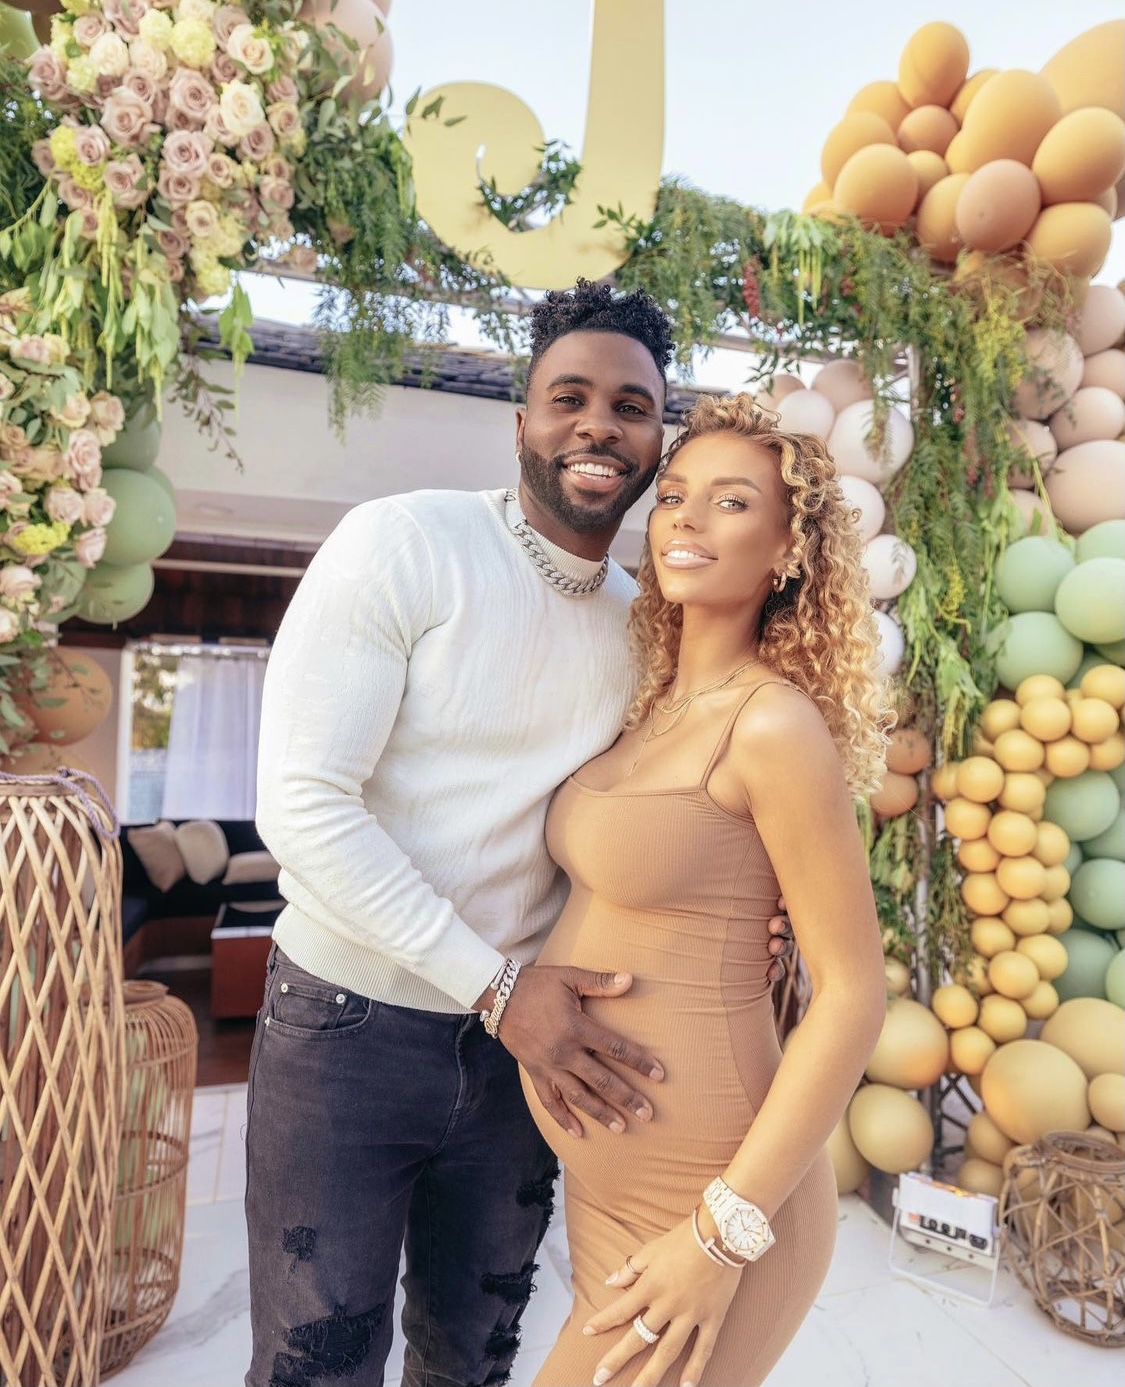 Cute Photos From Jason Derulo And Jena Frumes’ Intimate Baby Shower